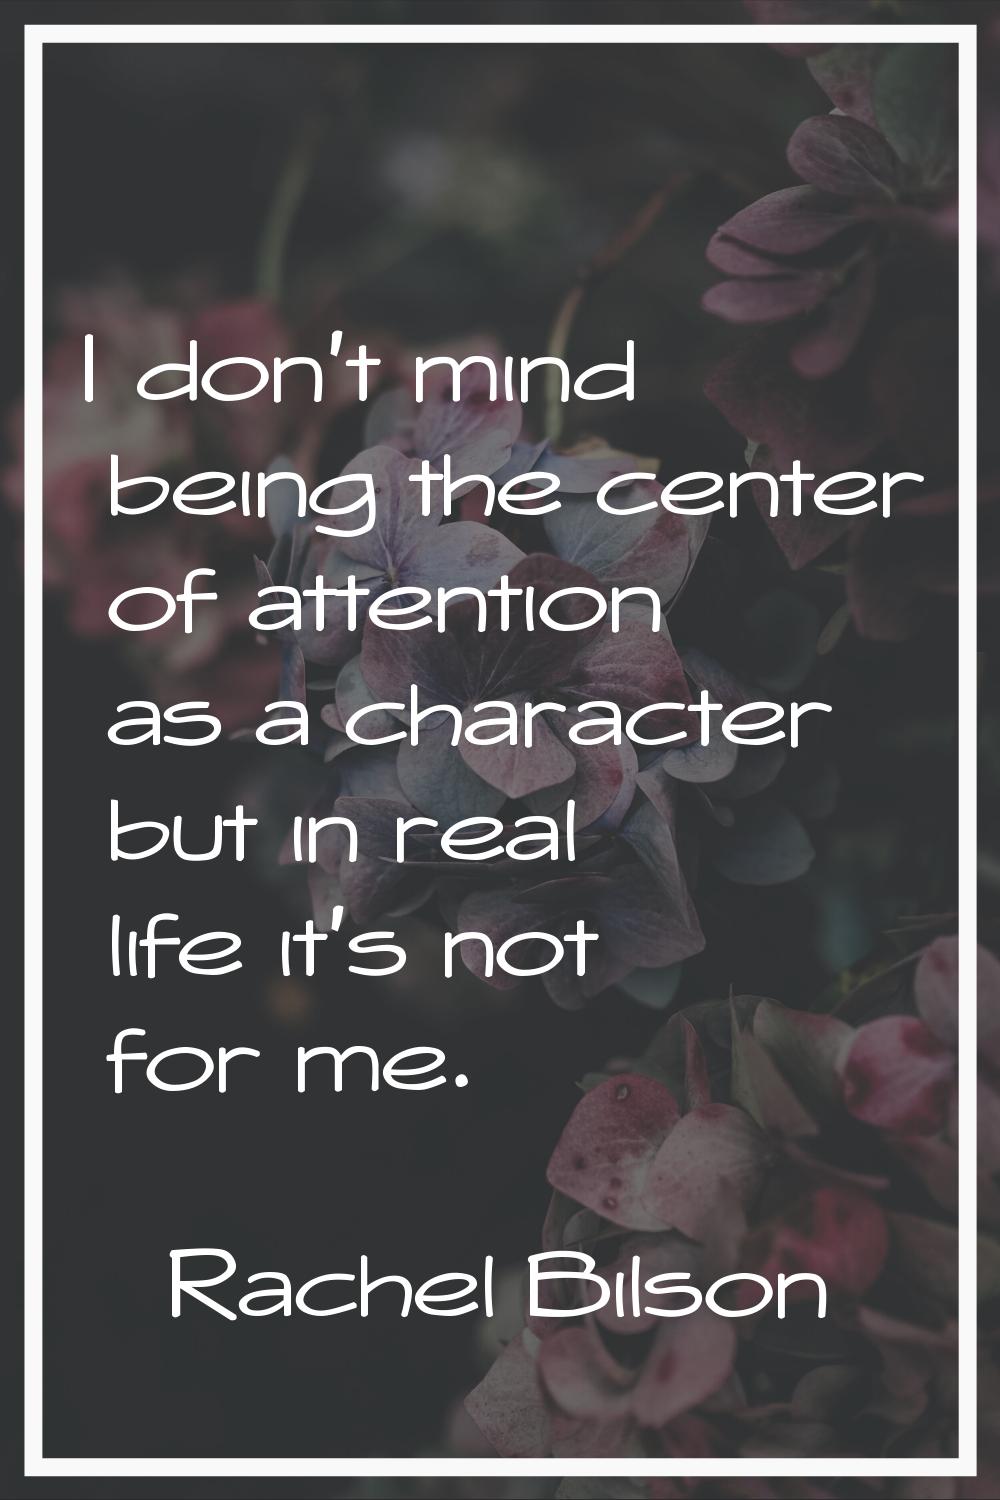 I don't mind being the center of attention as a character but in real life it's not for me.